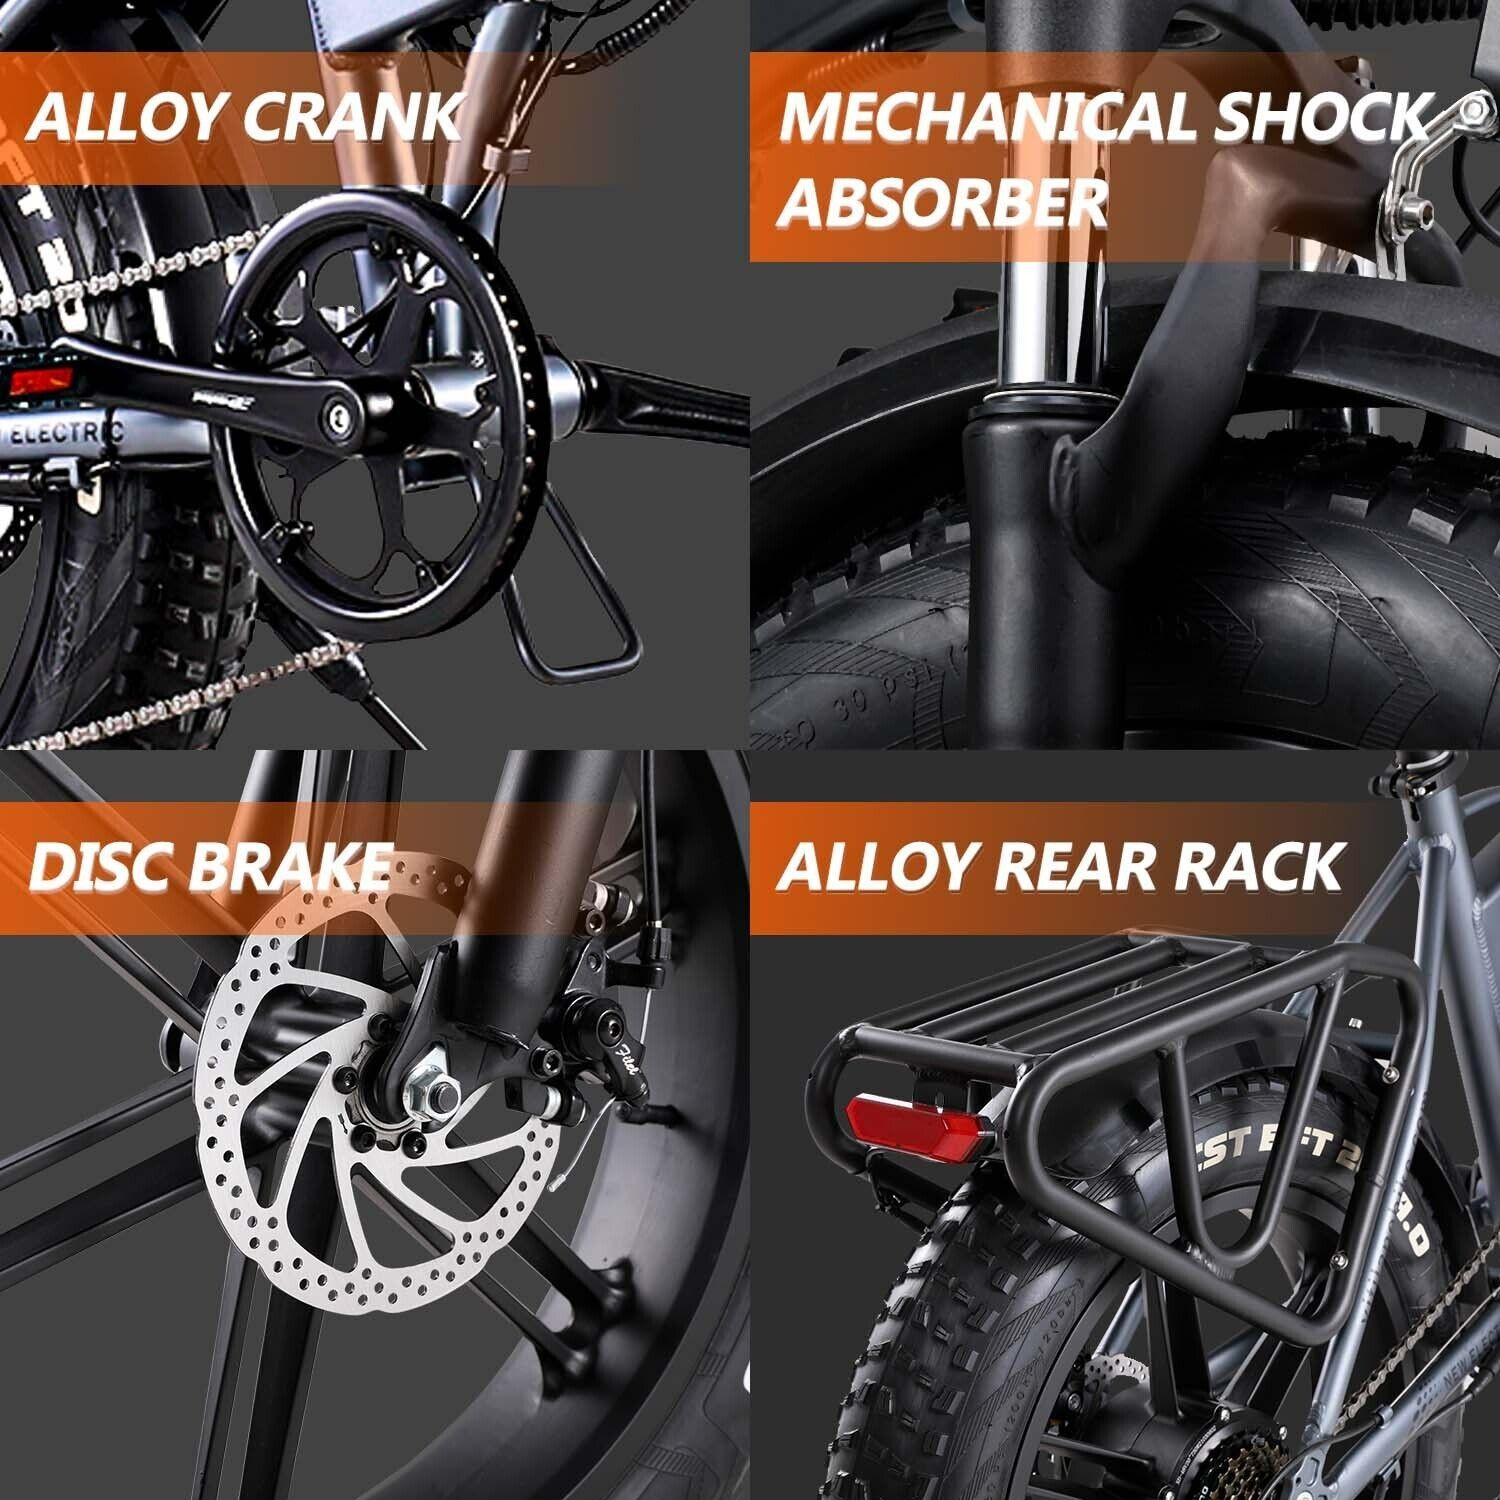 a bicycle with a mechanical shock absorber disc brake and alloy rear rack